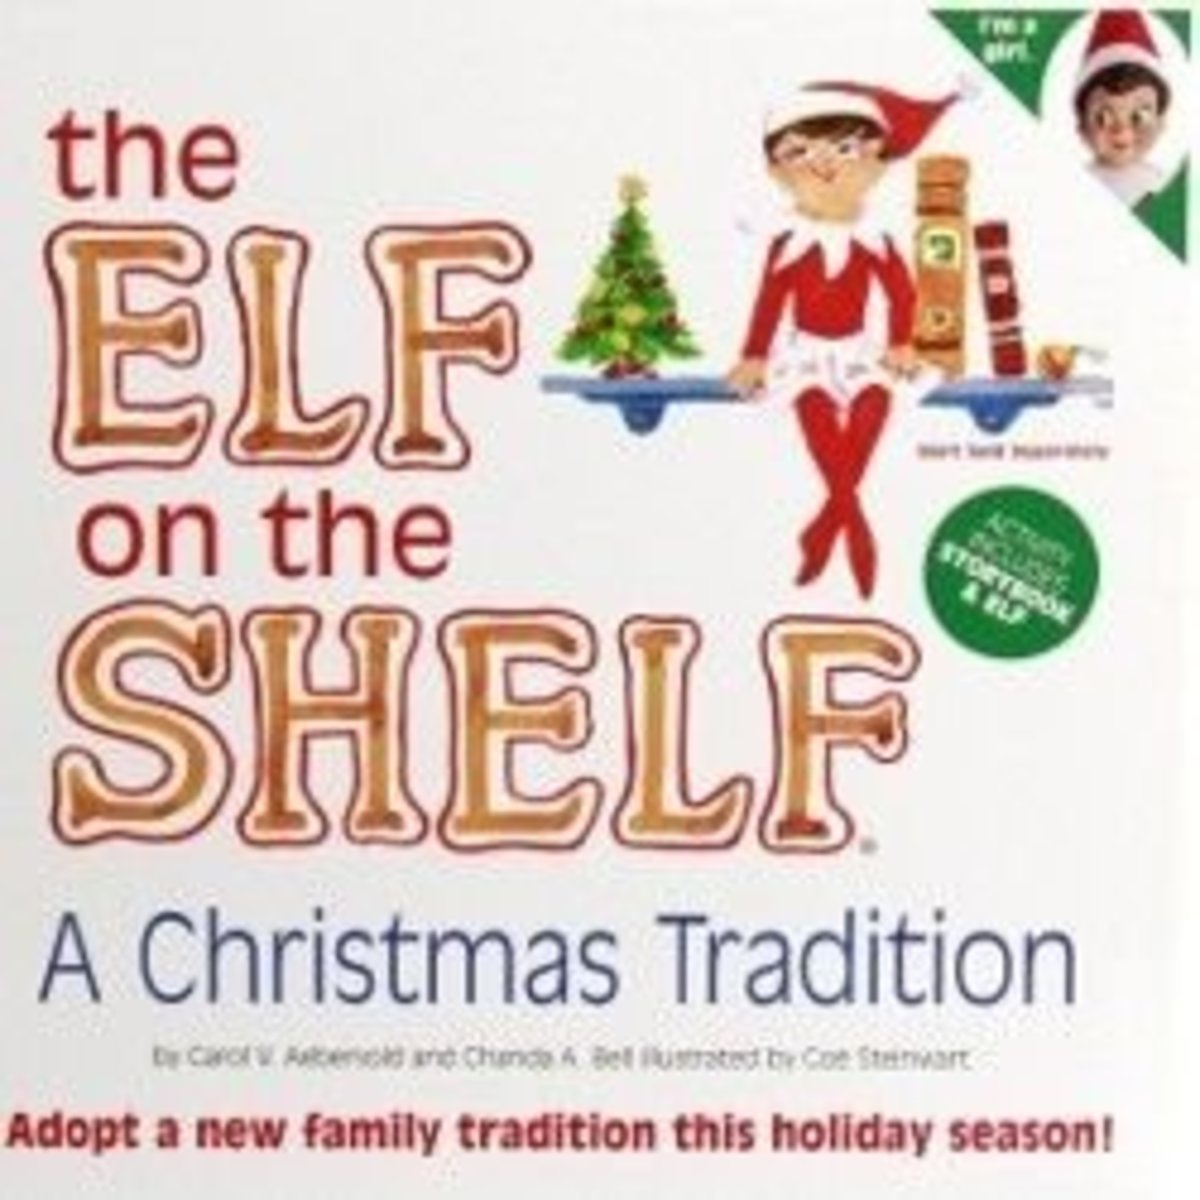 The Elf On The Shelf: A Christmas Tradition | hubpages